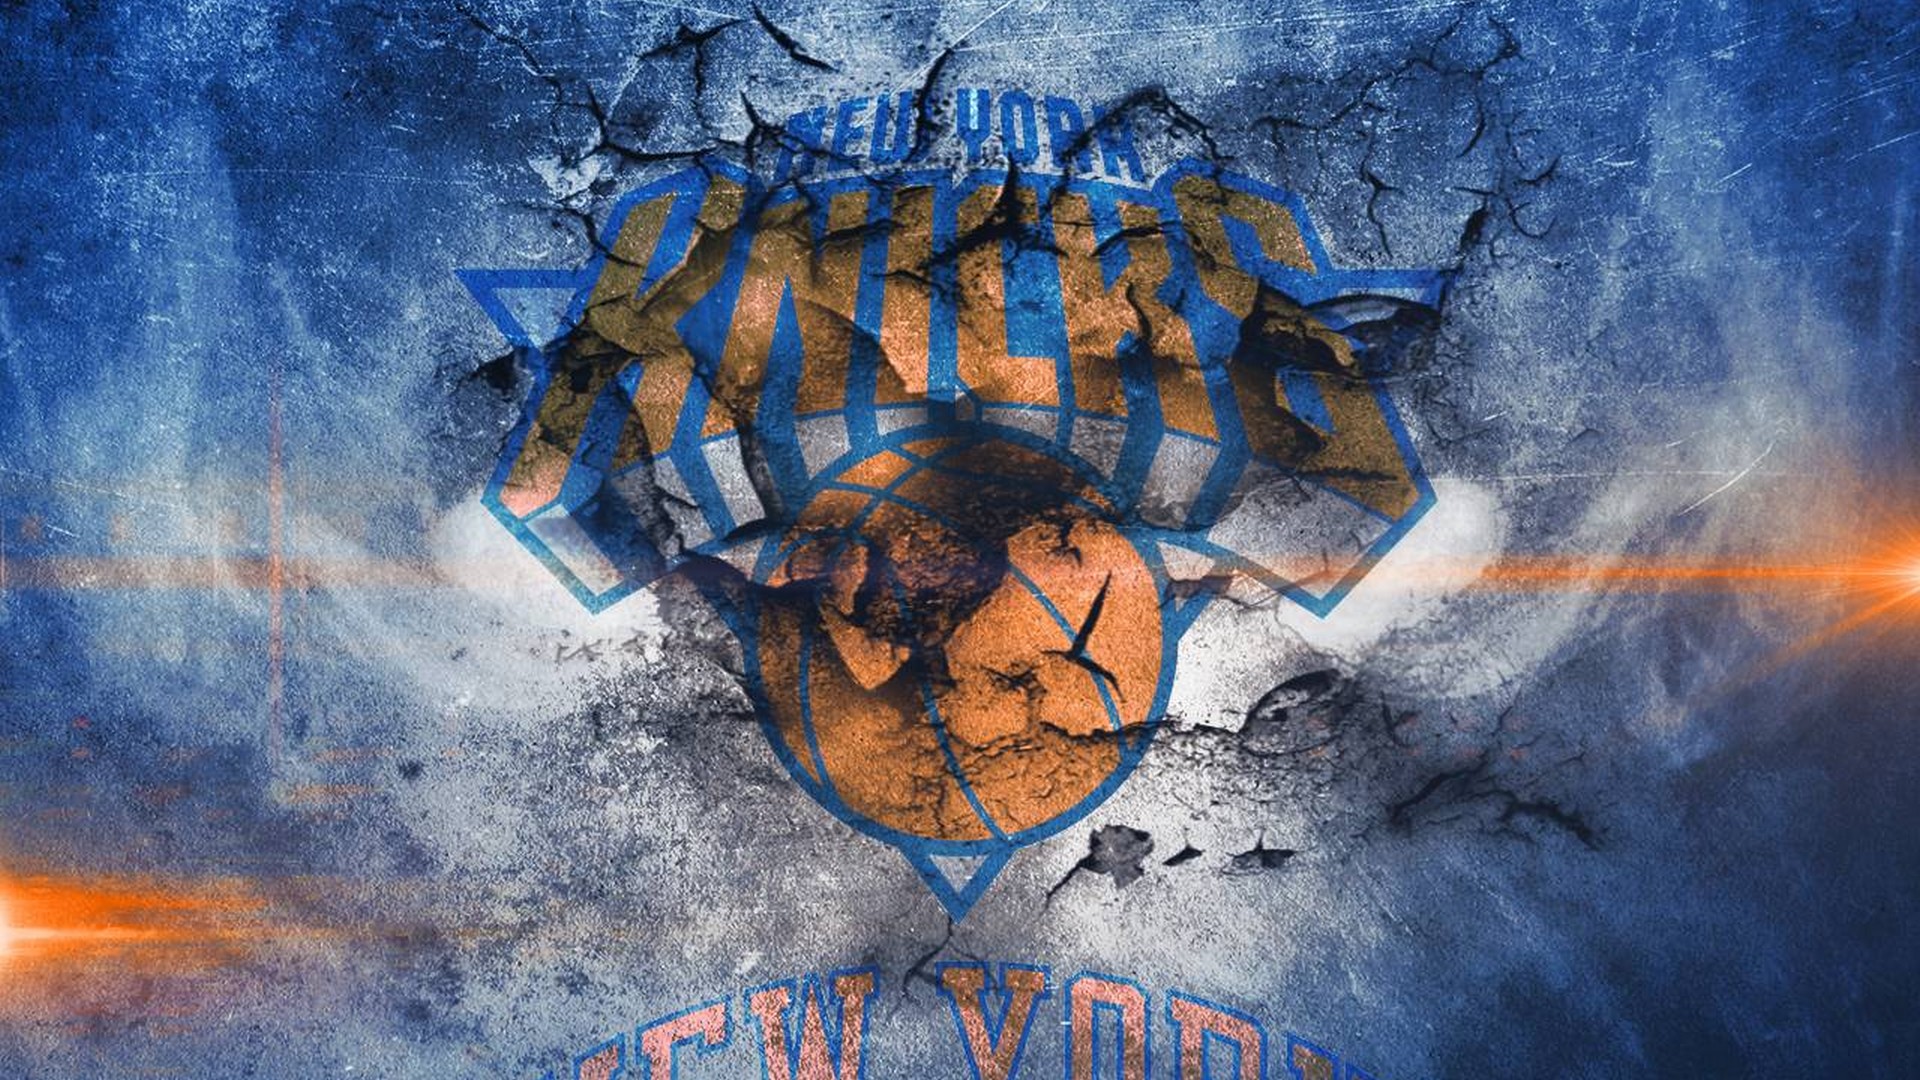 Knicks HD Wallpapers with image dimensions 1920x1080 pixel. You can make this wallpaper for your Desktop Computer Backgrounds, Windows or Mac Screensavers, iPhone Lock screen, Tablet or Android and another Mobile Phone device